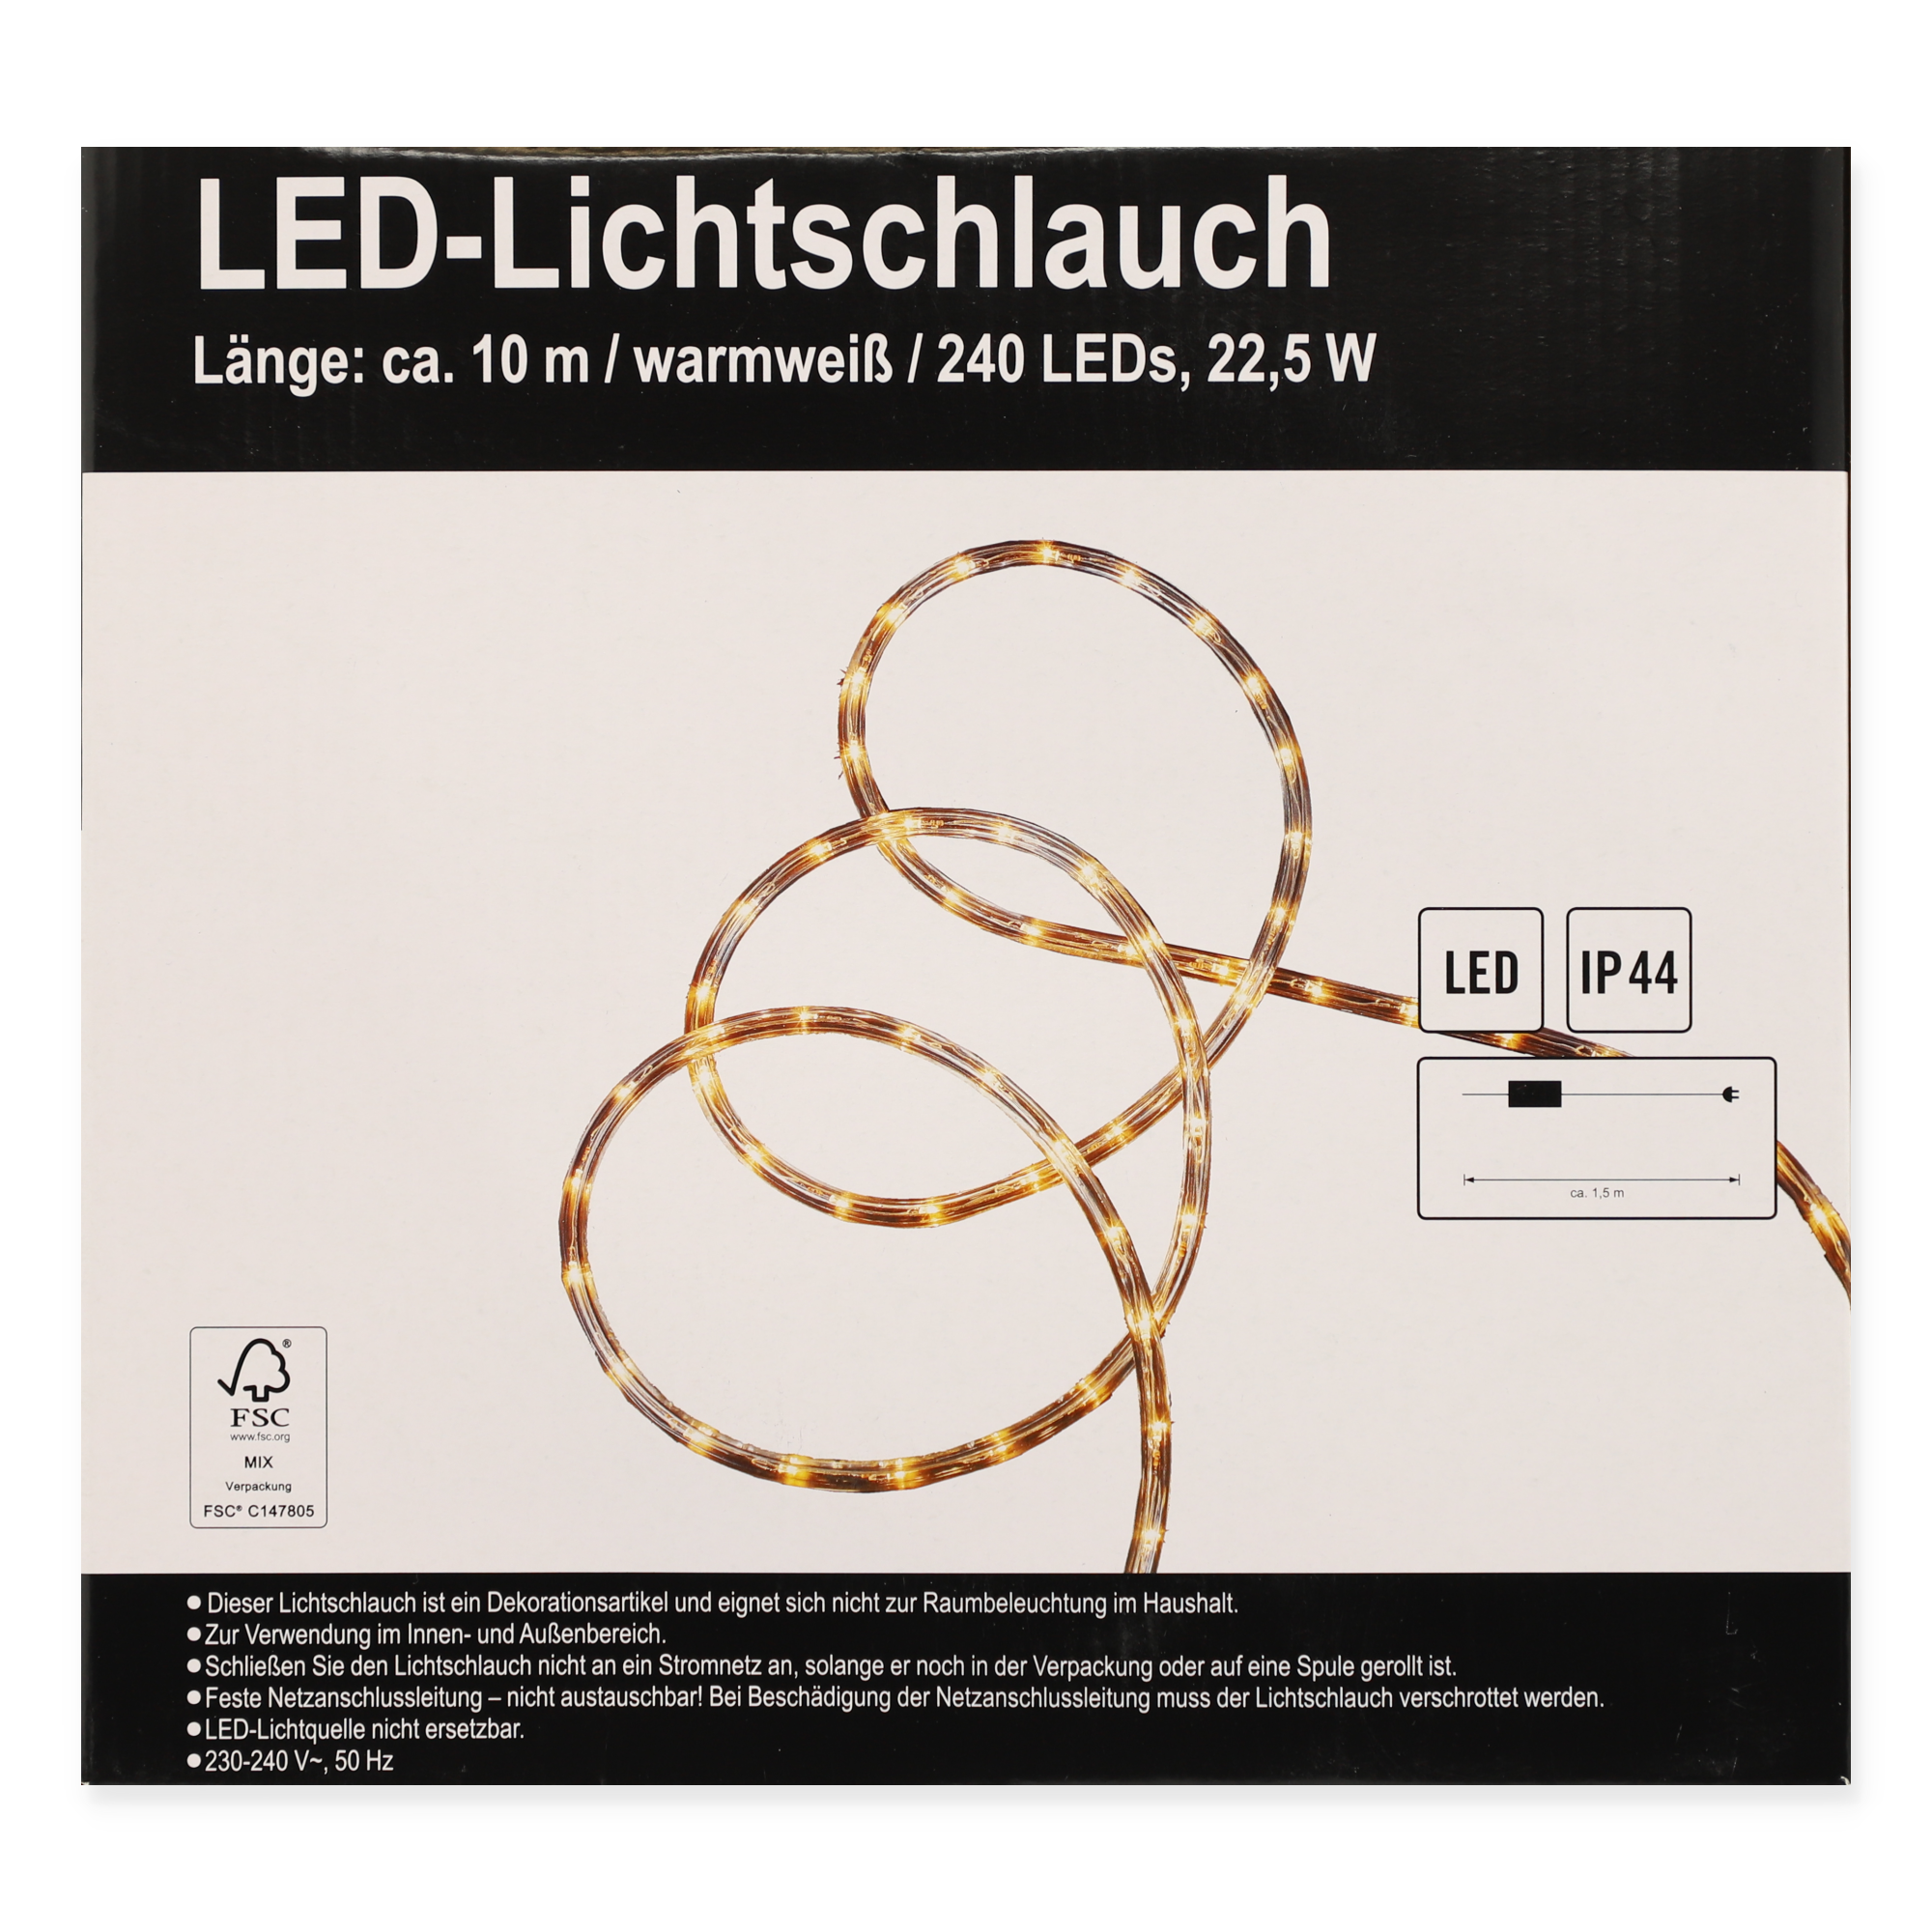 LED-Lichtschlauch 240 LEDs warmweiß 10 m + product picture